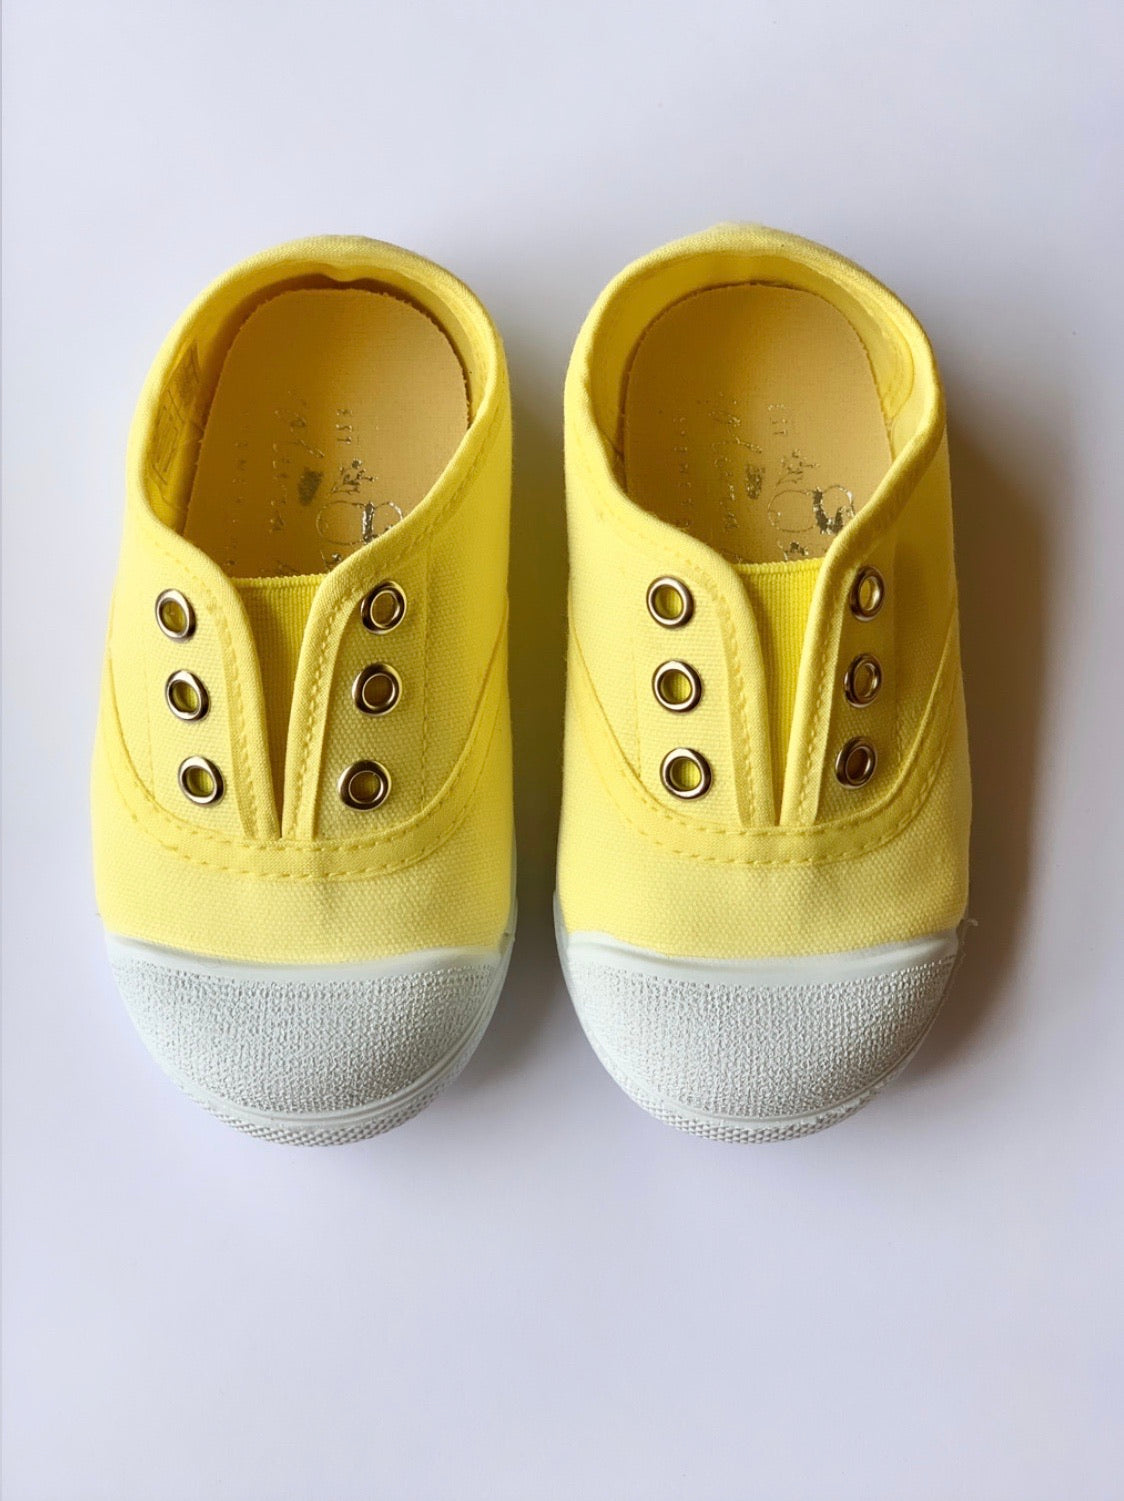 Our OLIVIA ANN soft canvas shoes have a new and improved material that is supersoft and comfortable, and perfect for speedy slip-ons when there's a game in the garden. Plimsoles, sneakers. Kids shoes. Lemon.